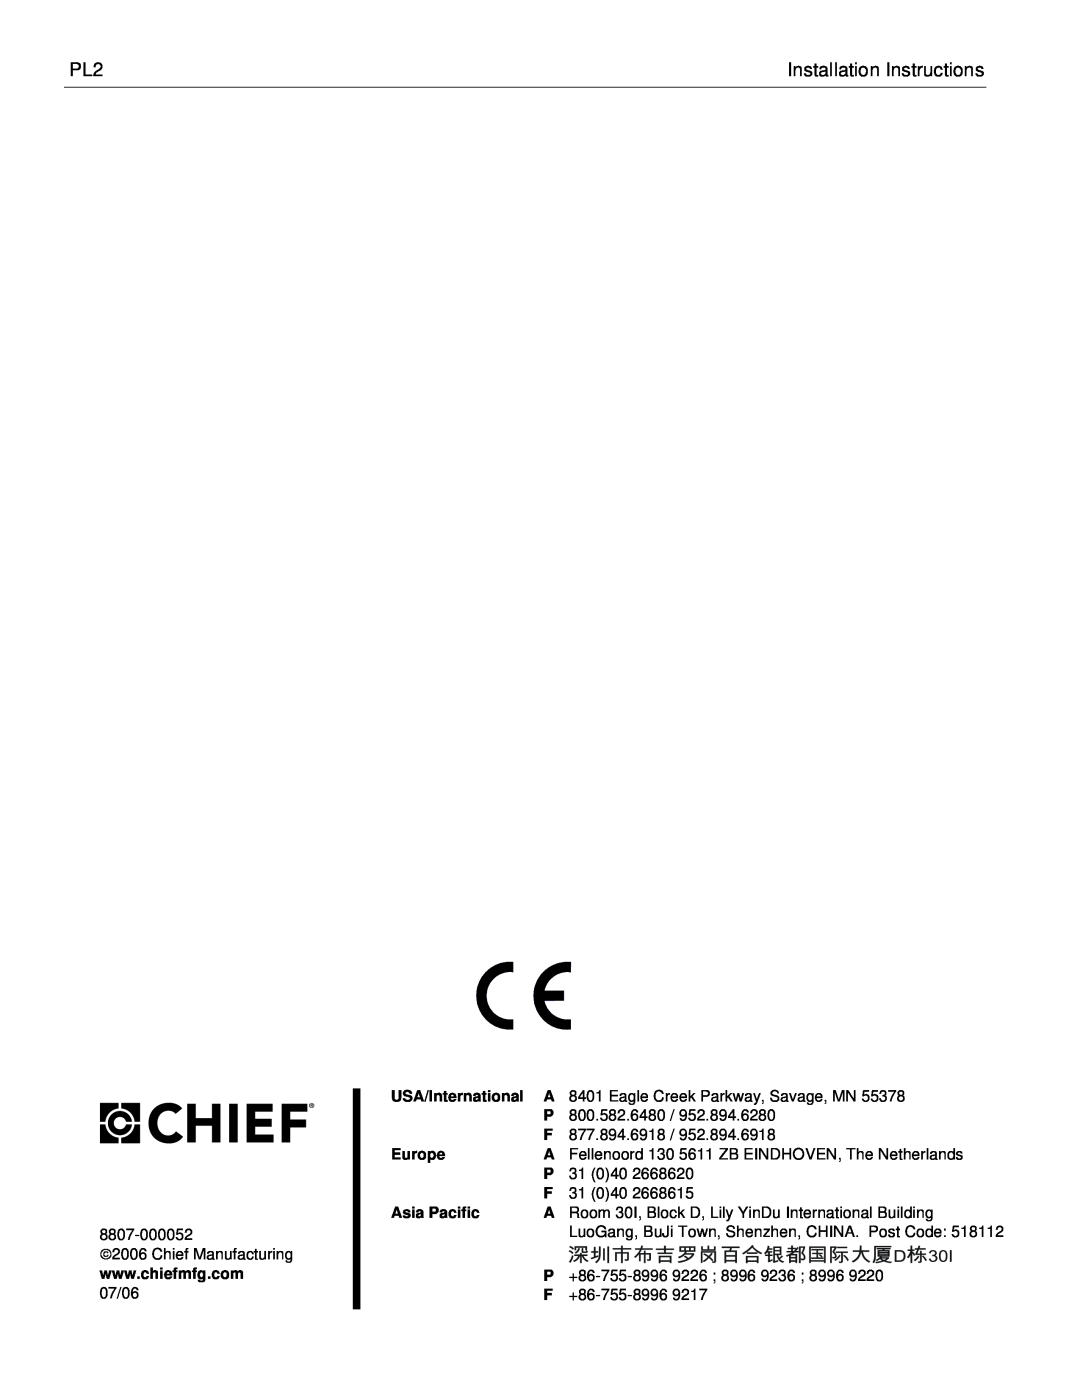 Chief Manufacturing PL2 installation instructions Installation Instructions, LuoGang, BuJi Town, Shenzhen, CHINA. Post Code 